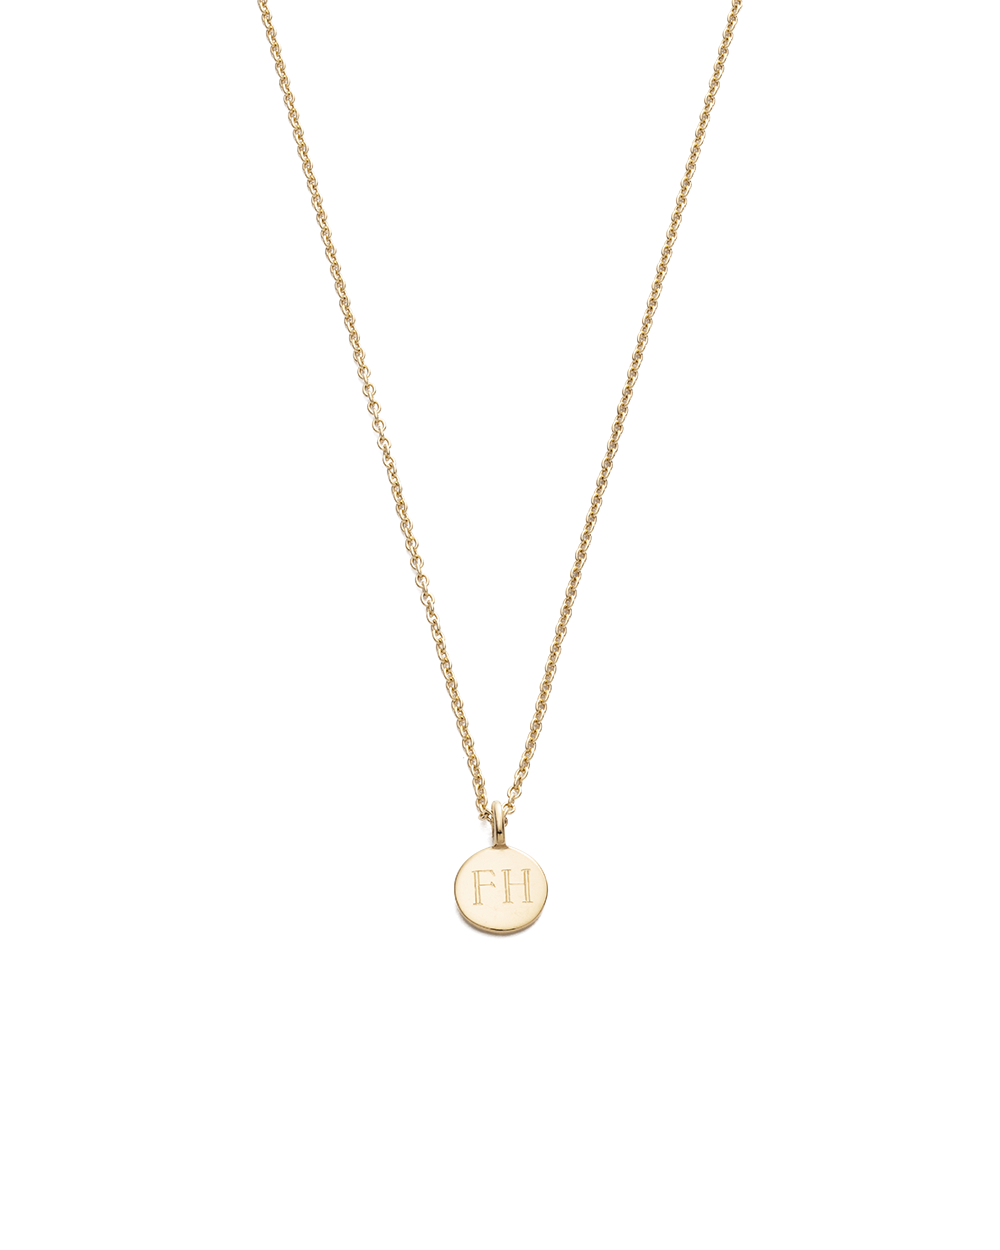 CLASSIC CIRCLE NECKLACE (9K GOLD) - IMAGE 5